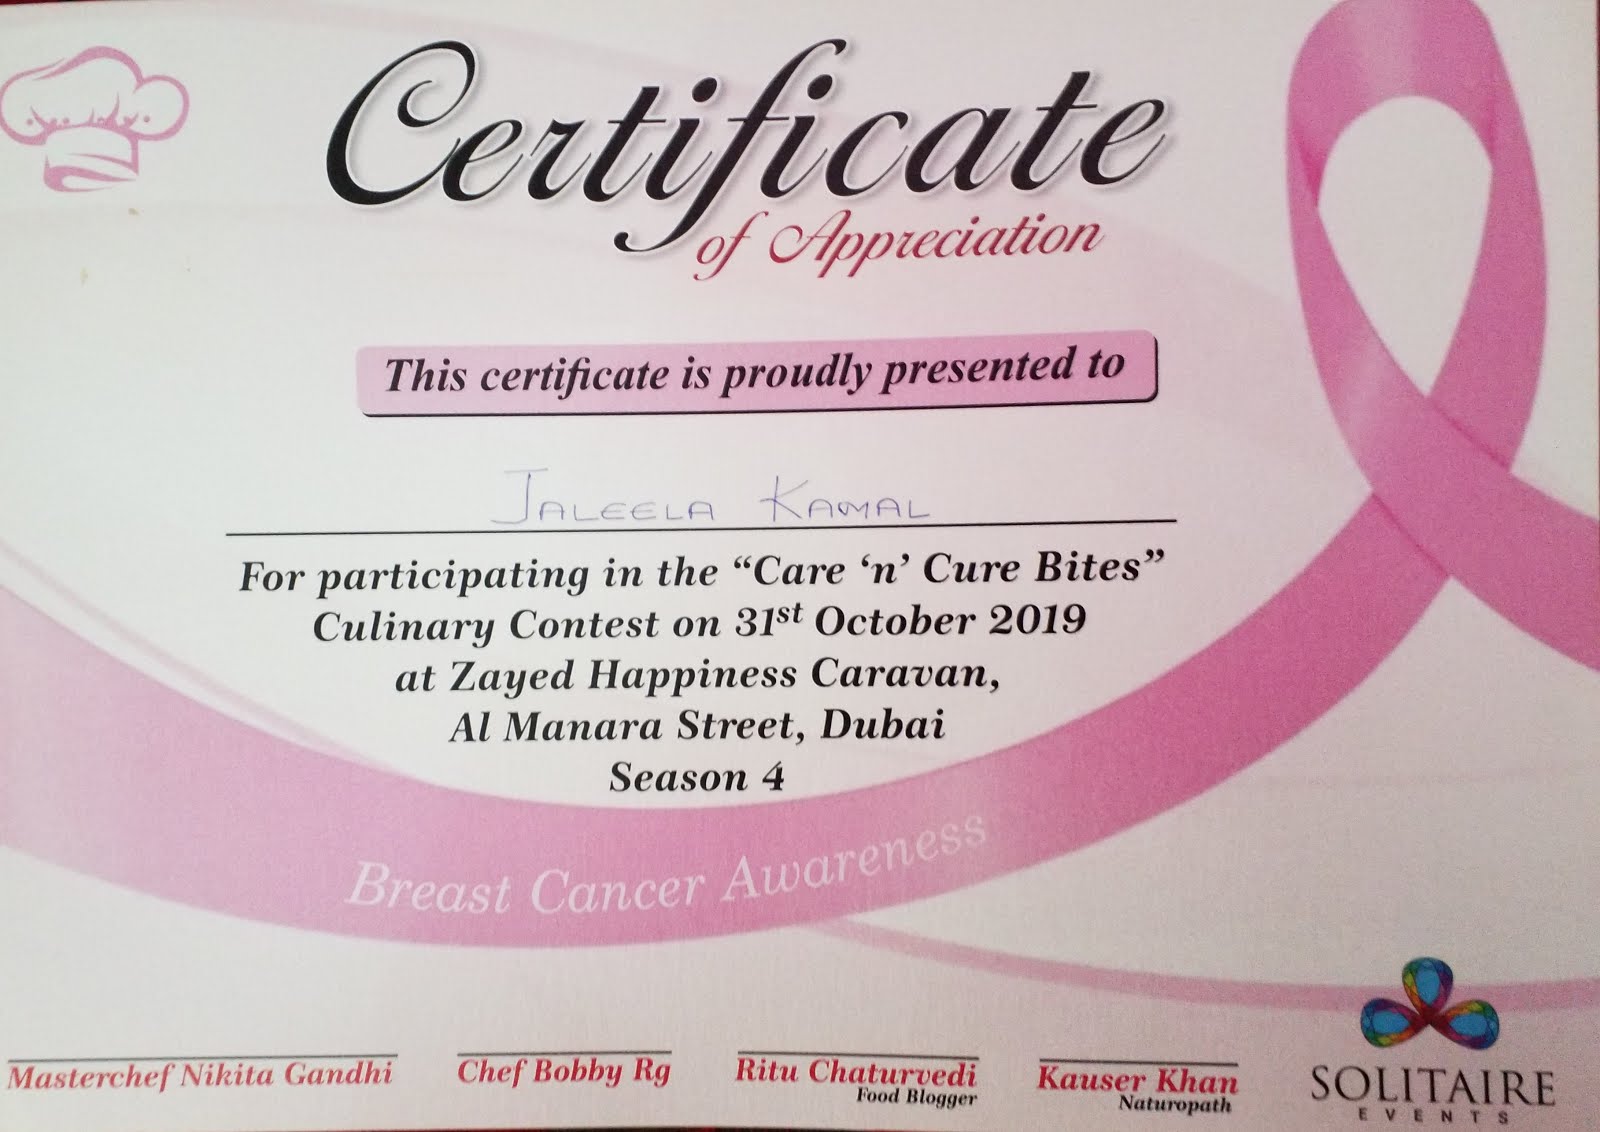 Care N Cure / Cancer Awareness-2019